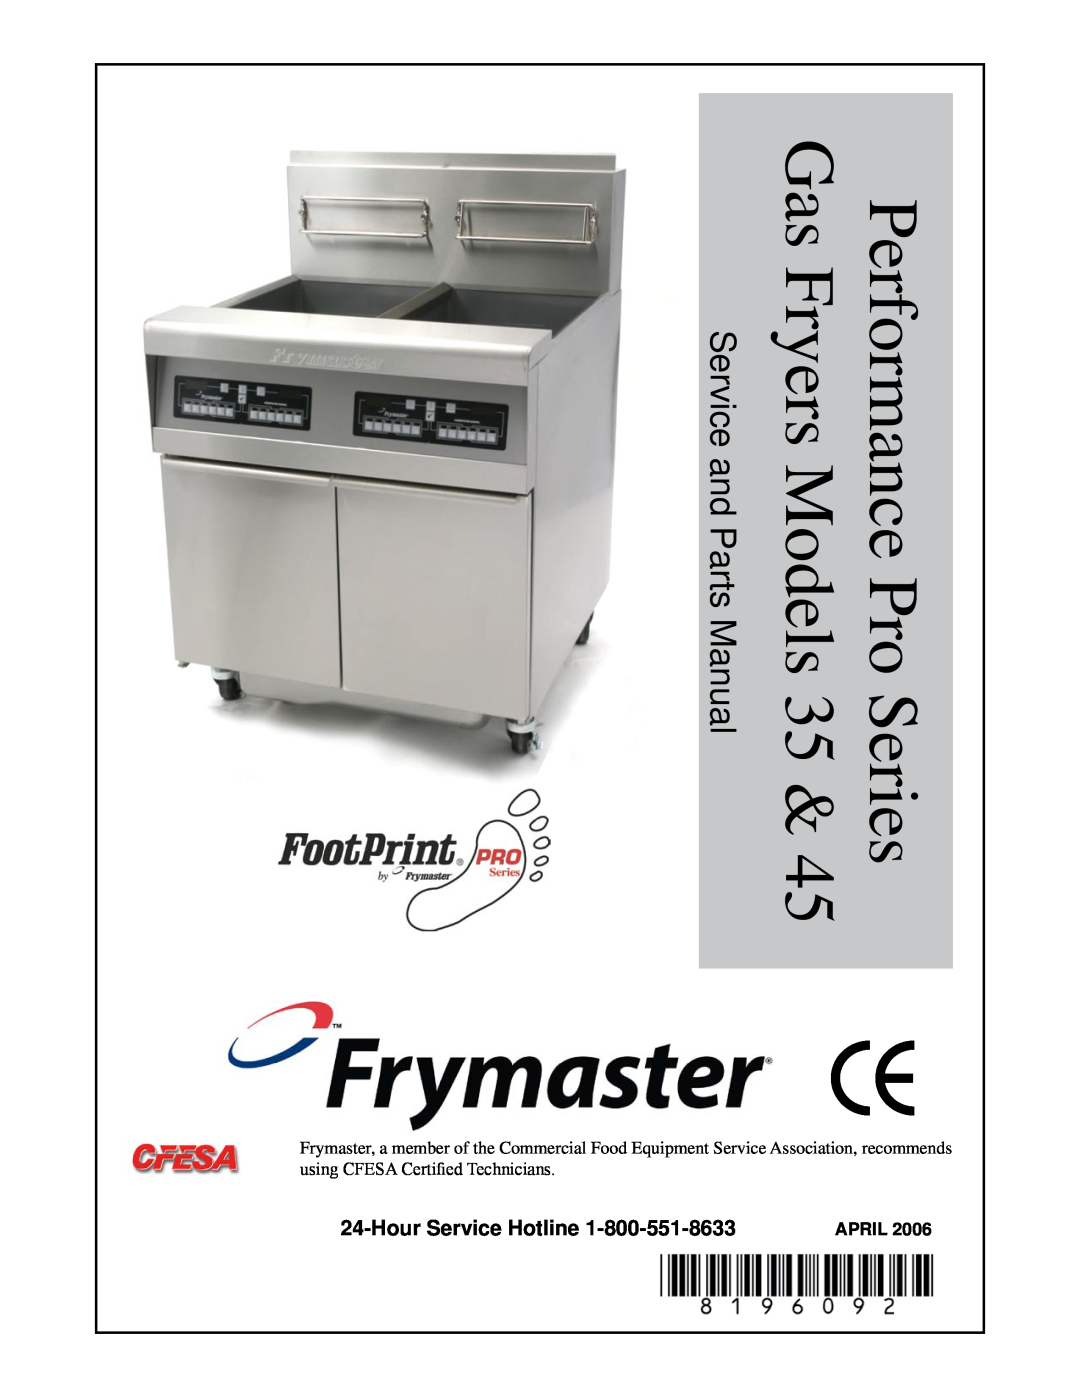 Frymaster 45, 35 manual HourService Hotline, Performance Pro Series Gas Fryers Models, Service and Parts Manual, March 